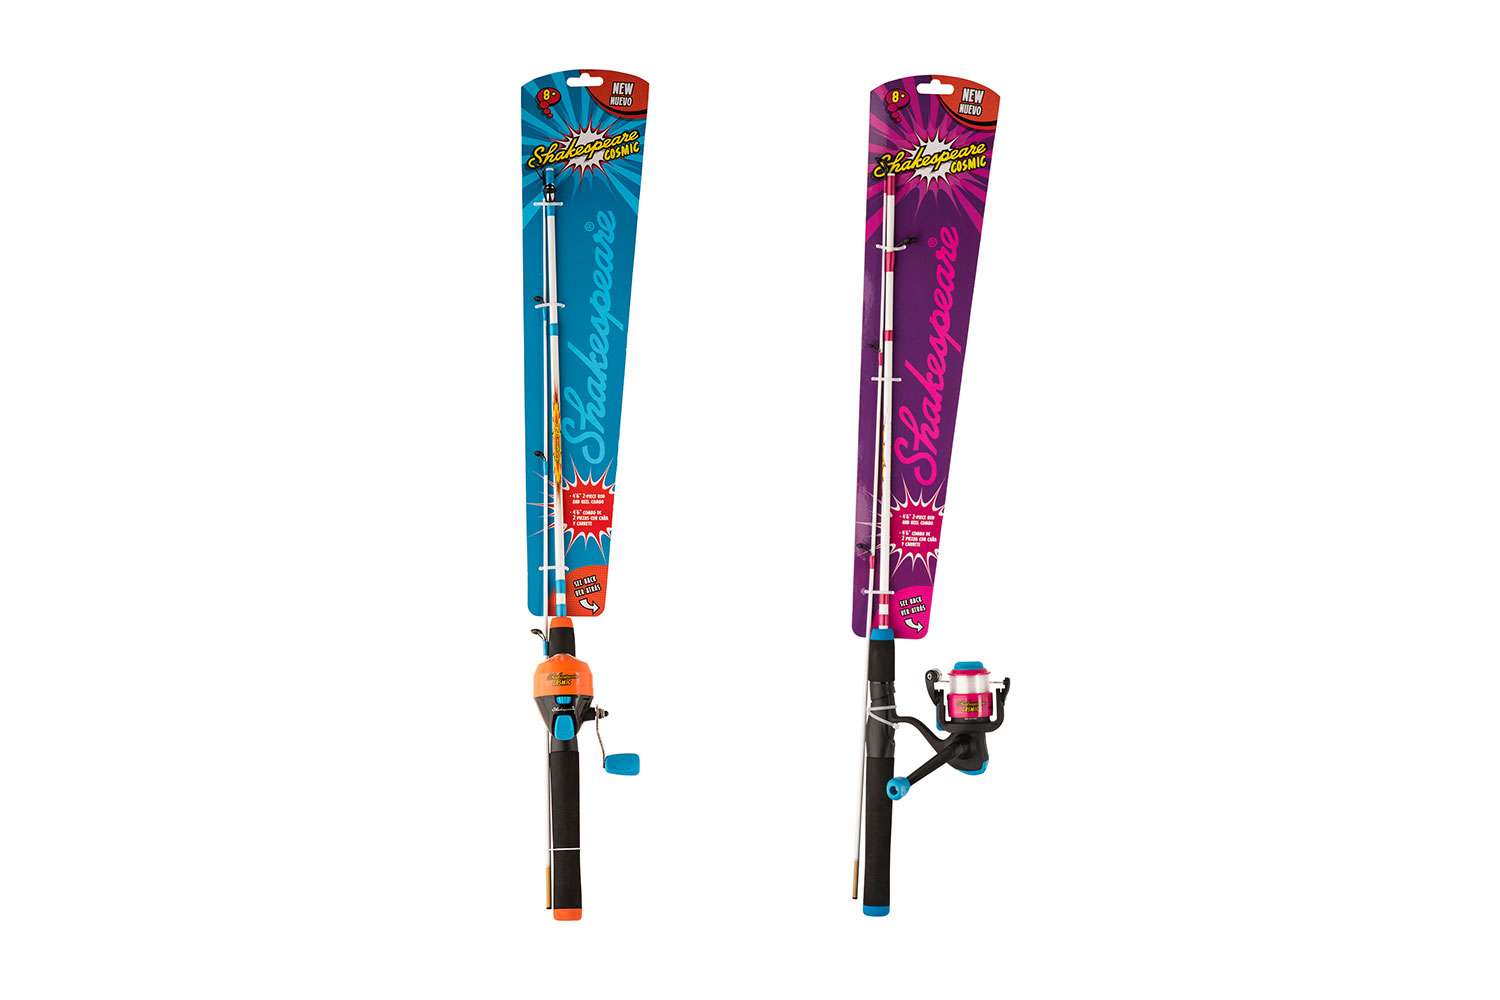 <p><b>Shakespeare Cosmic Youth Combos, $14.99</b></p> Specially designed for youth anglers ages eight and up, the new brightly colored Cosmic series Combos from Shakespeare are designed to get young anglers excited about fishing. <br> <a href=